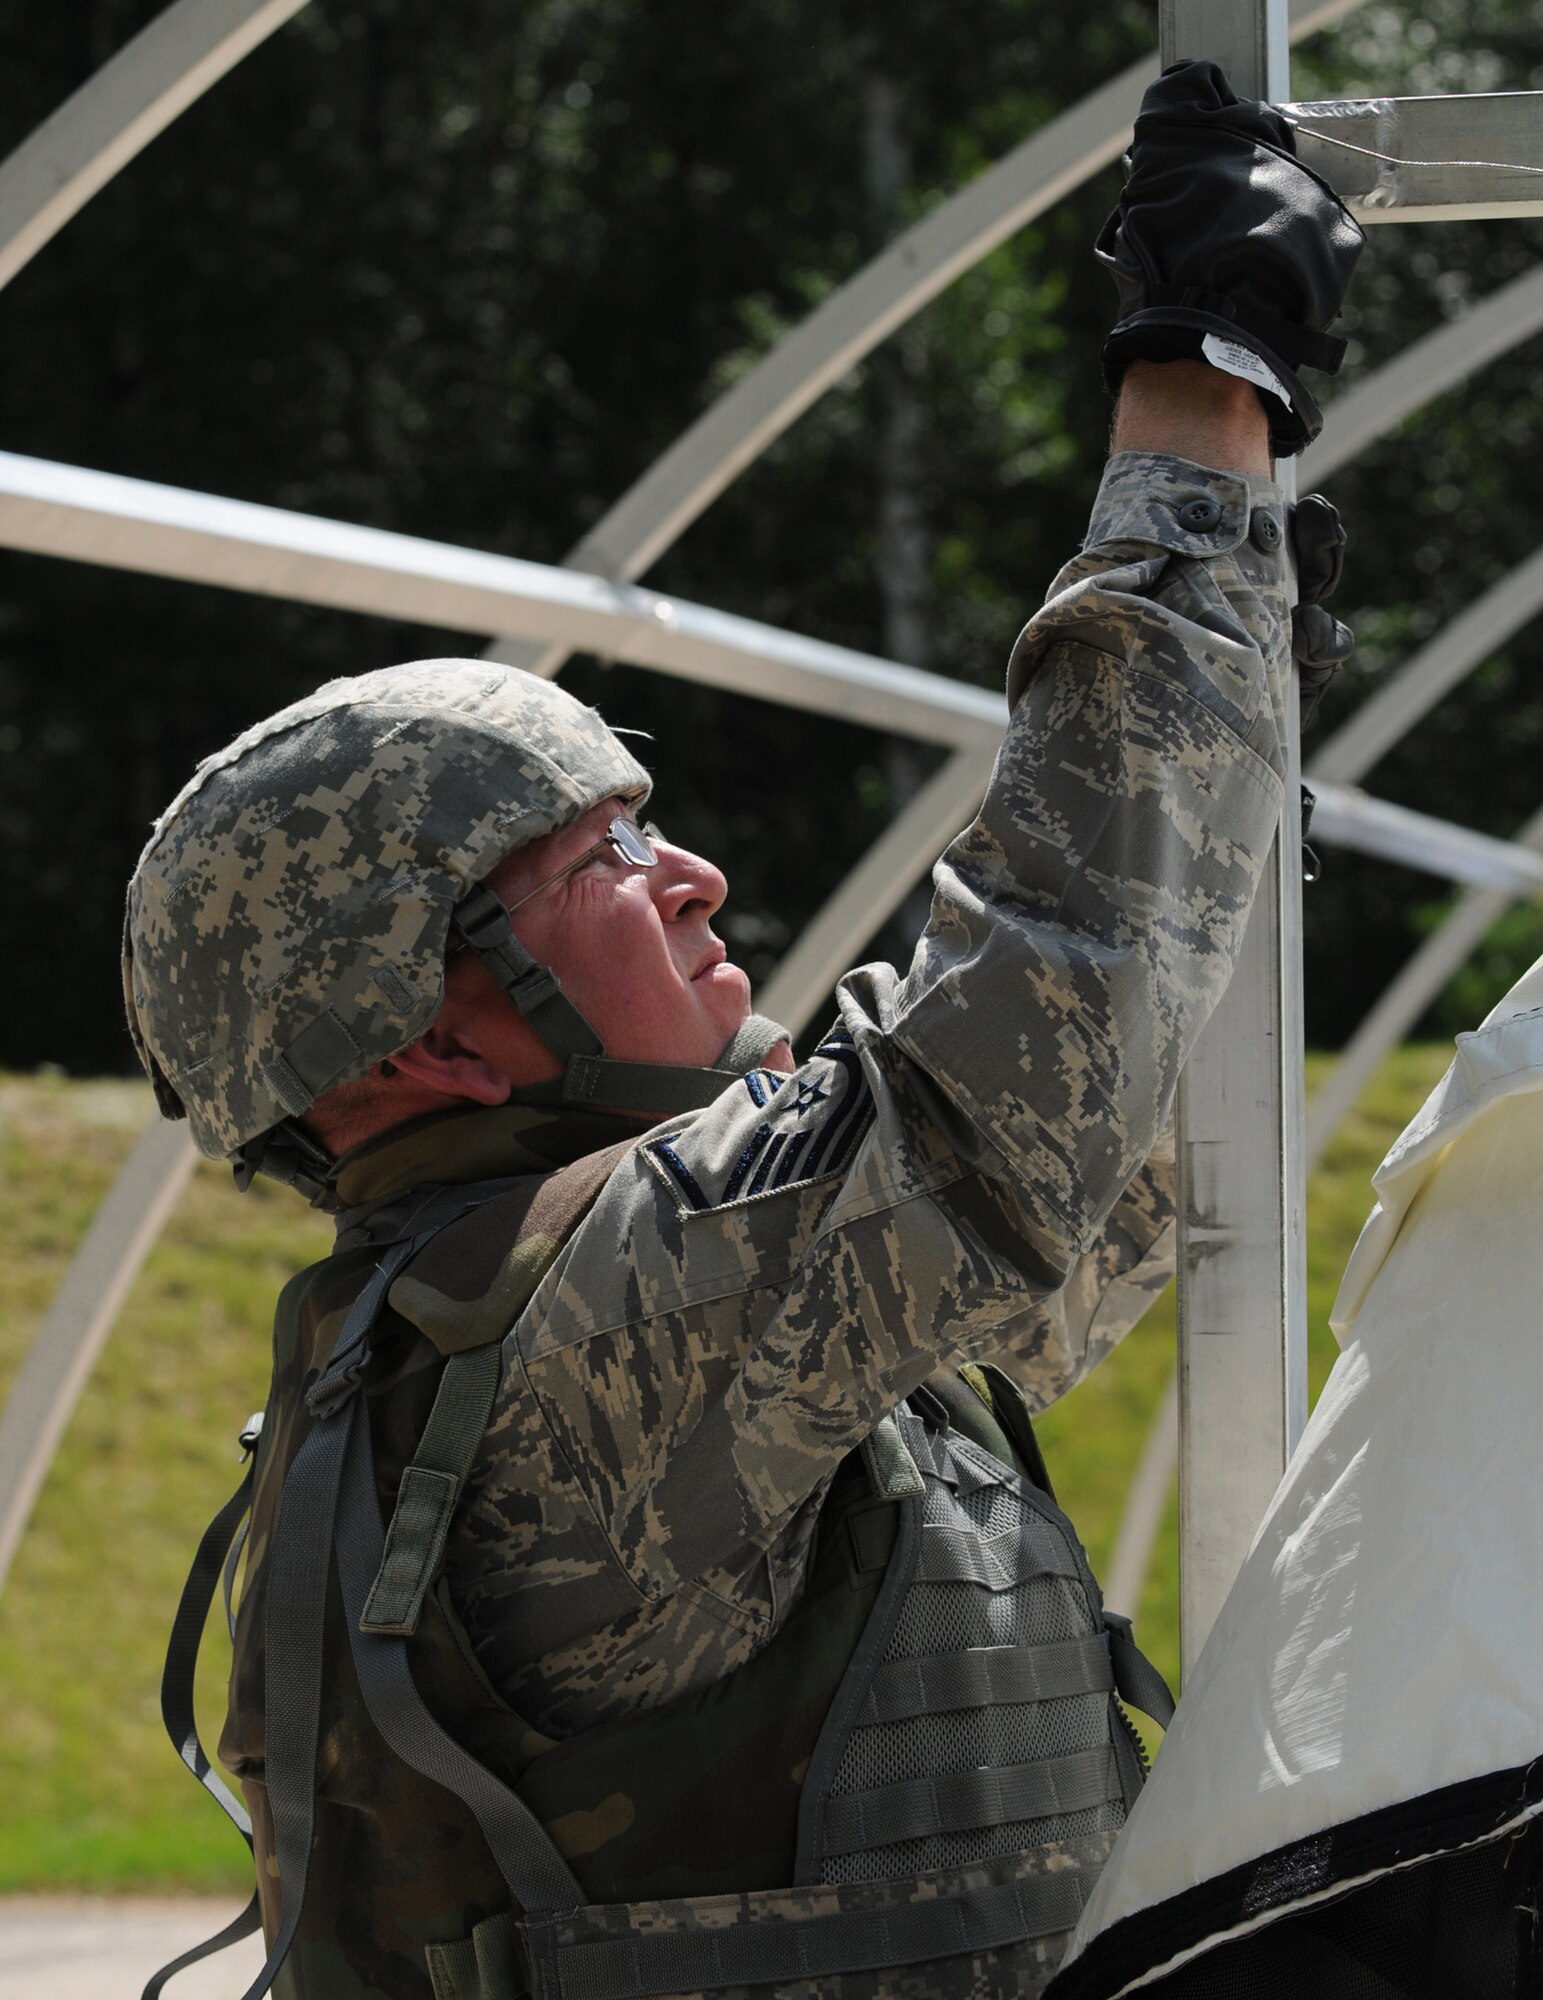 Master Sgt. Leonard Merk, member of the 786th Civil Engineer Squadron Ramstein Air Base, Germany, helps assemble a small shelter system during a weeklong training exercise Silver Flag, August 1, 2009.  The Silver Flag exercise gives participants the basic contingency skills to set up a bed down operation anywhere in the world. (U.S. Air Force photo by:Tech. Sgt. Sean Mateo White)